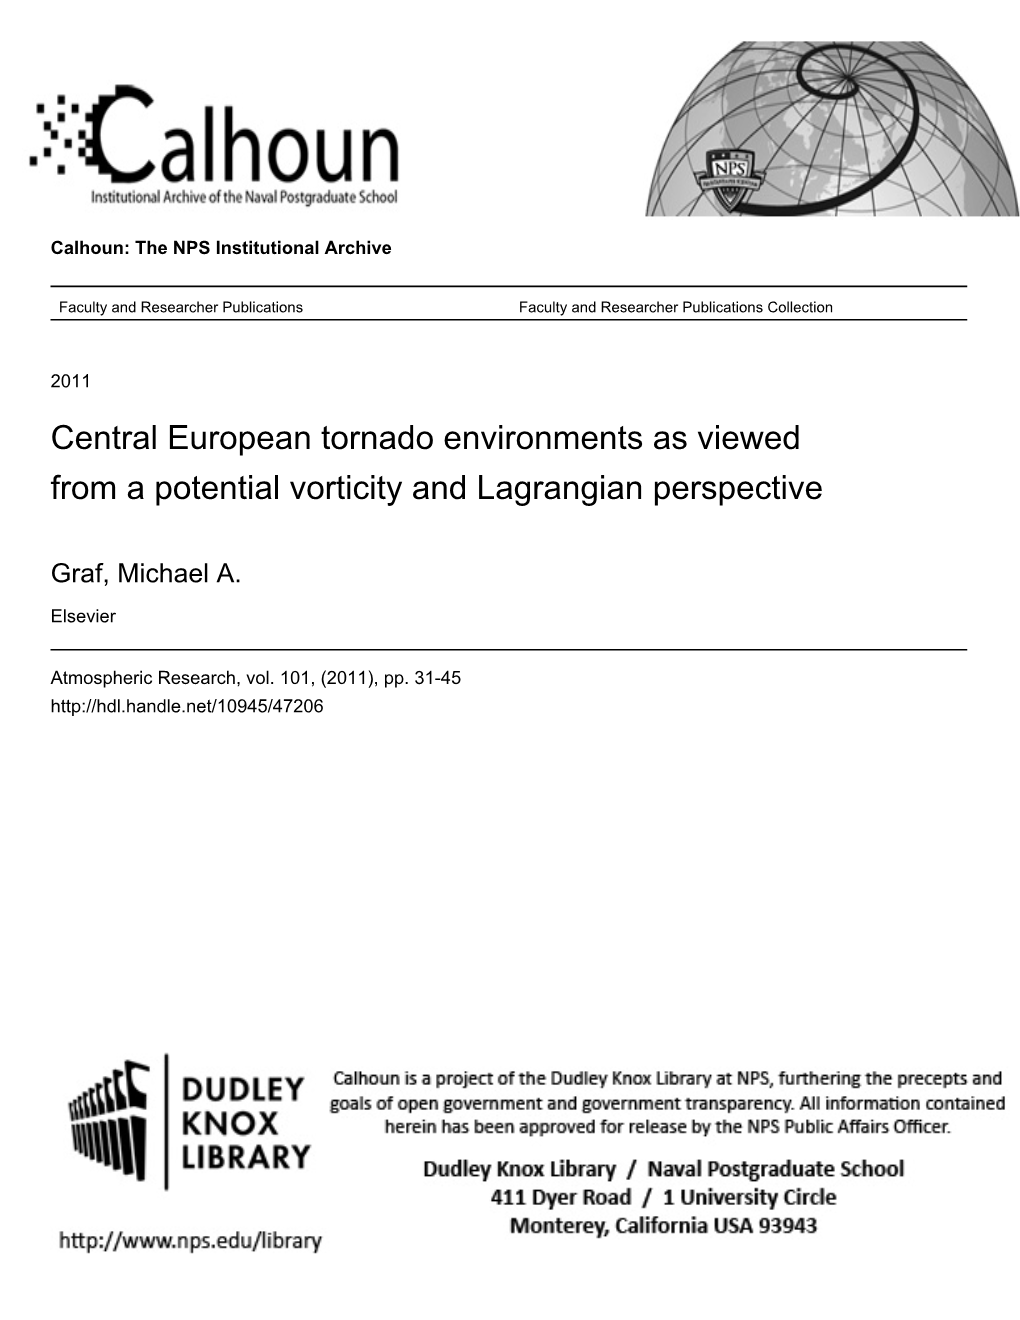 Central European Tornado Environments As Viewed from a Potential Vorticity and Lagrangian Perspective